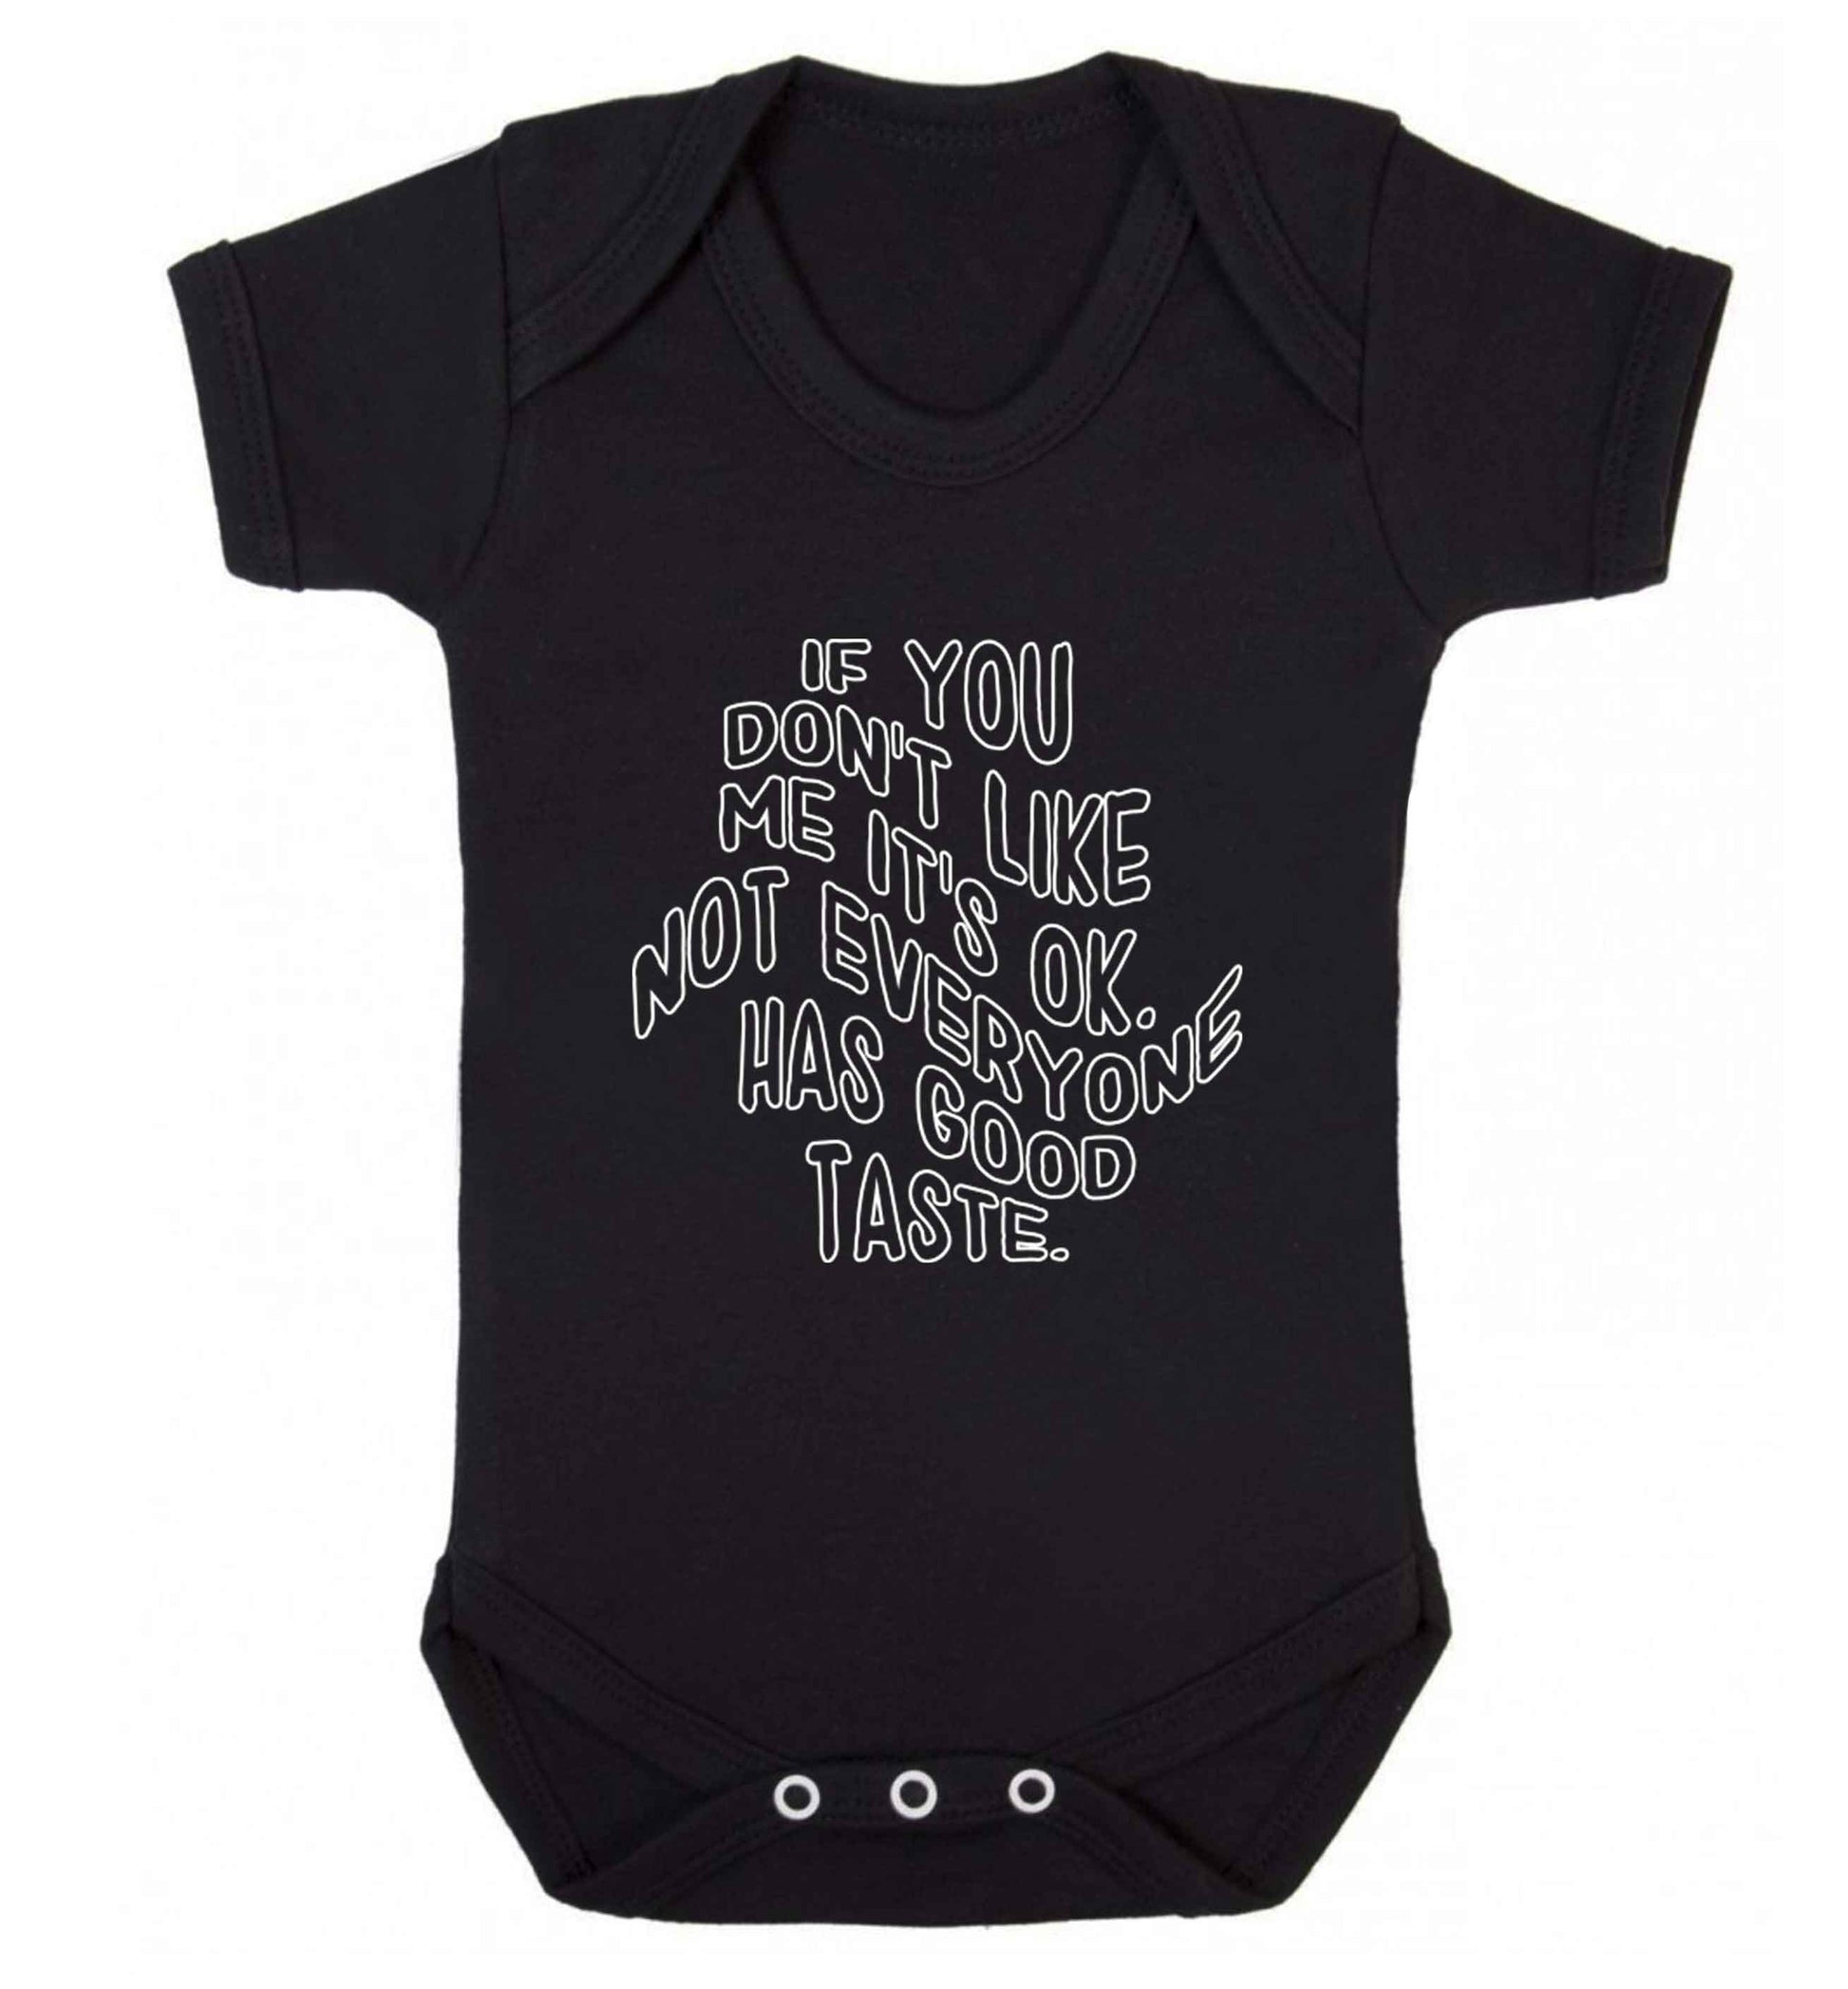 If you don't like me it's ok not everyone has good taste baby vest black 18-24 months